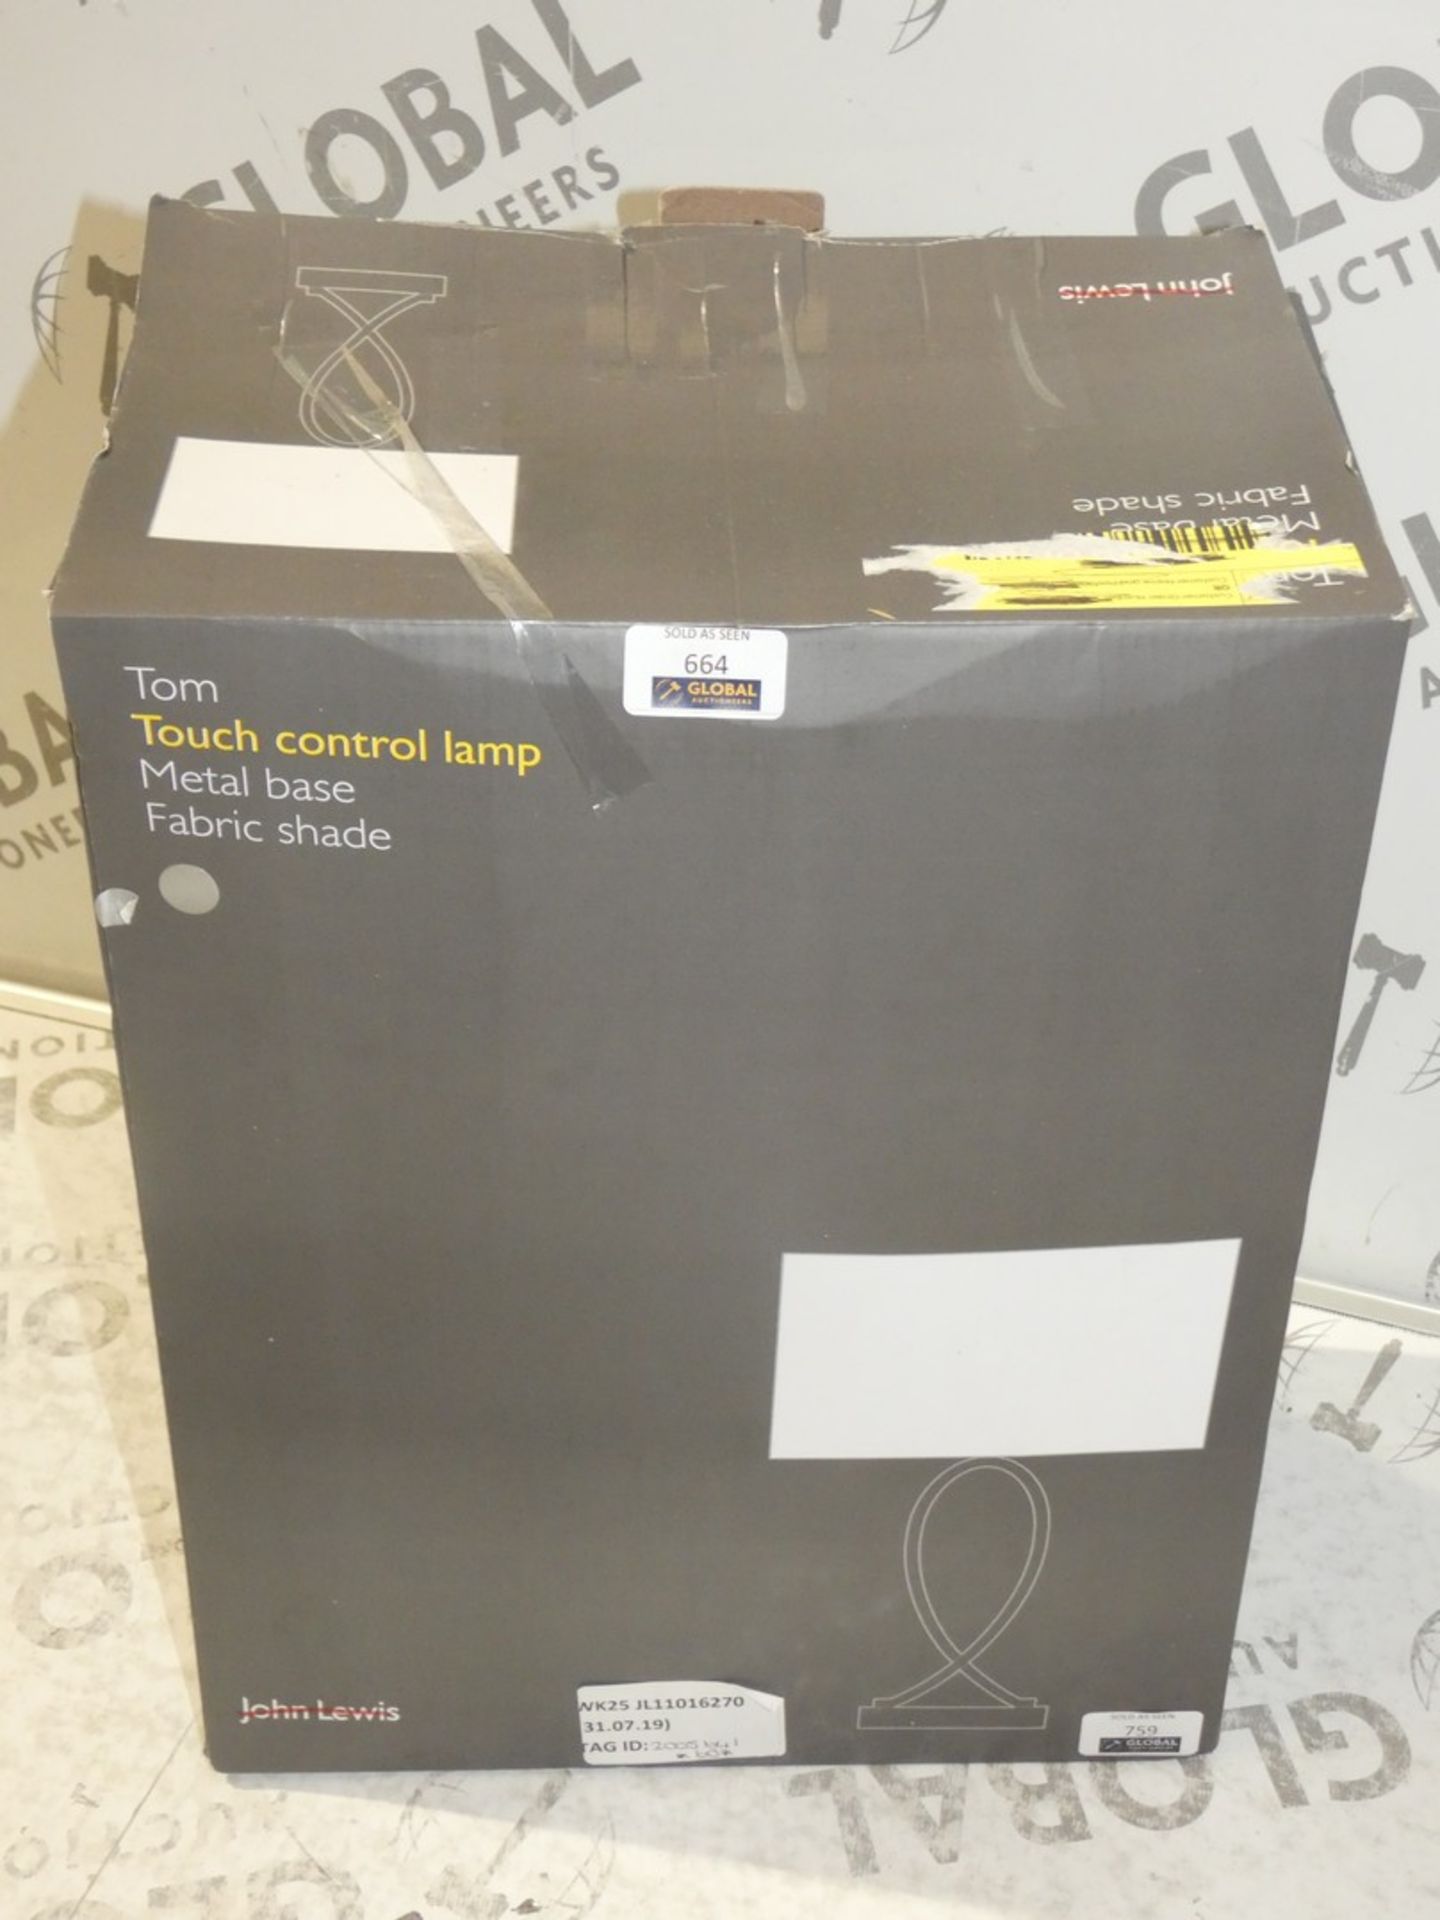 Boxed John Lewis And Partners Metal Touch Control Lamp RRP£60.0 (2005641)(Viewings And Appraisals